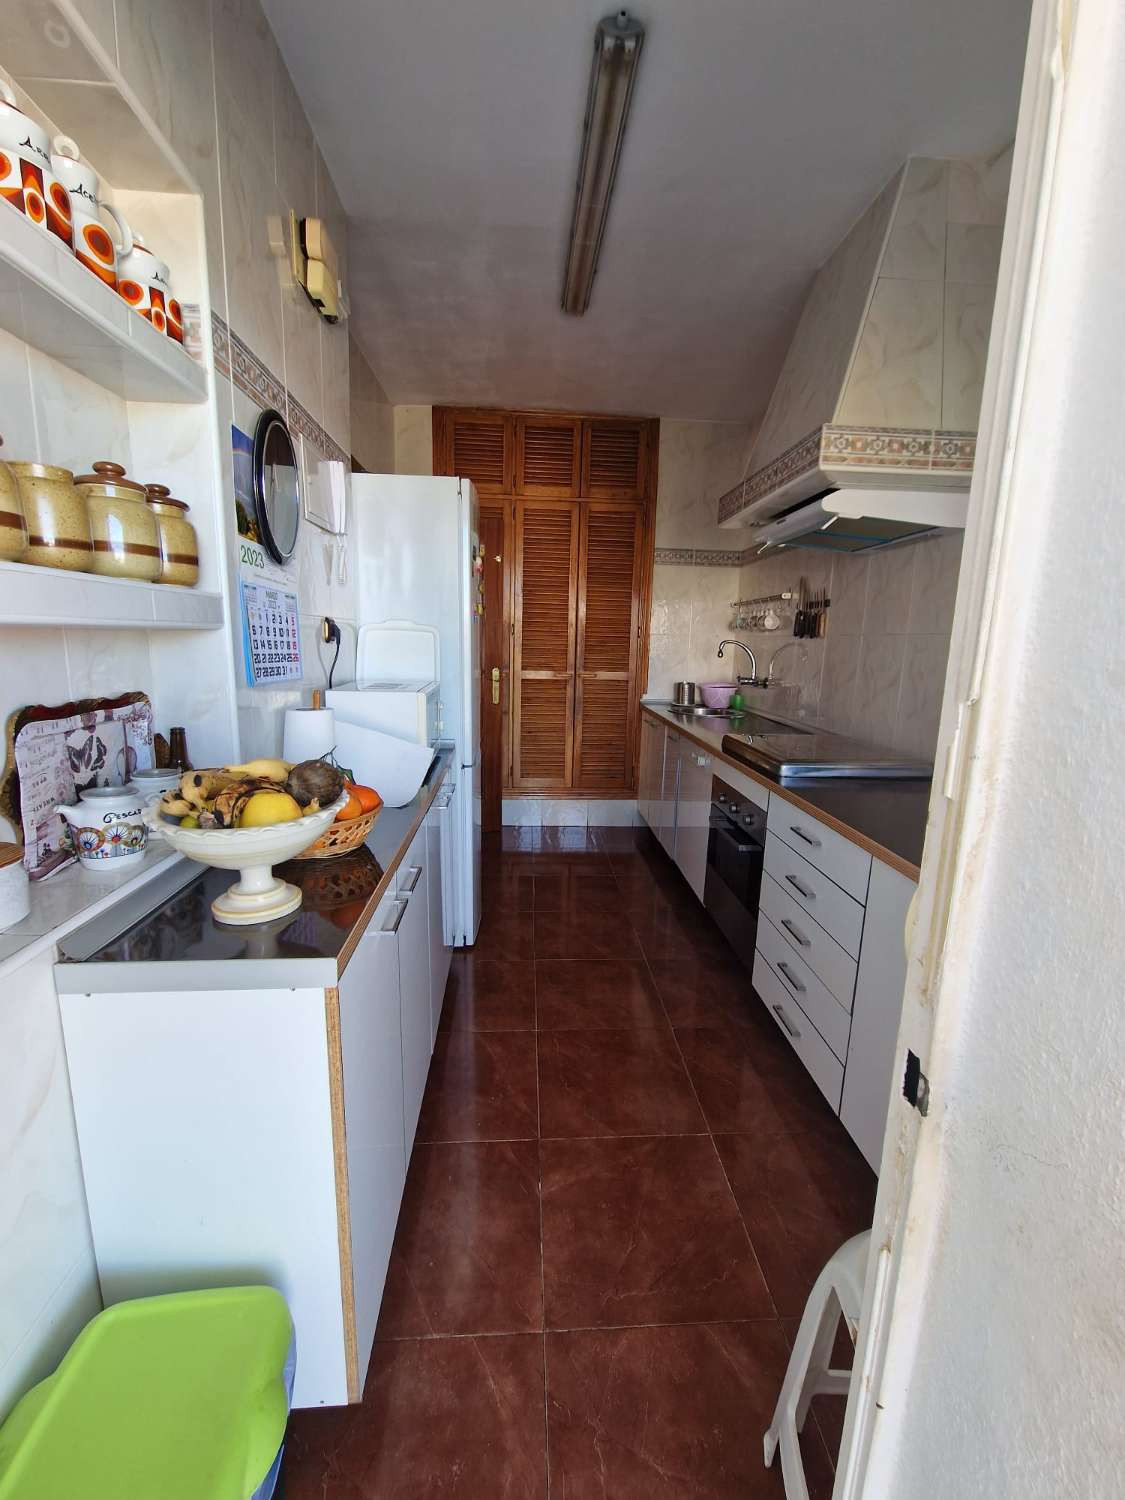 3293-VA for sale a spacious villa on a 558 m2 plot, on the ground floor there is a living room with fireplace, an independent fitted kitchen, 4 bed...